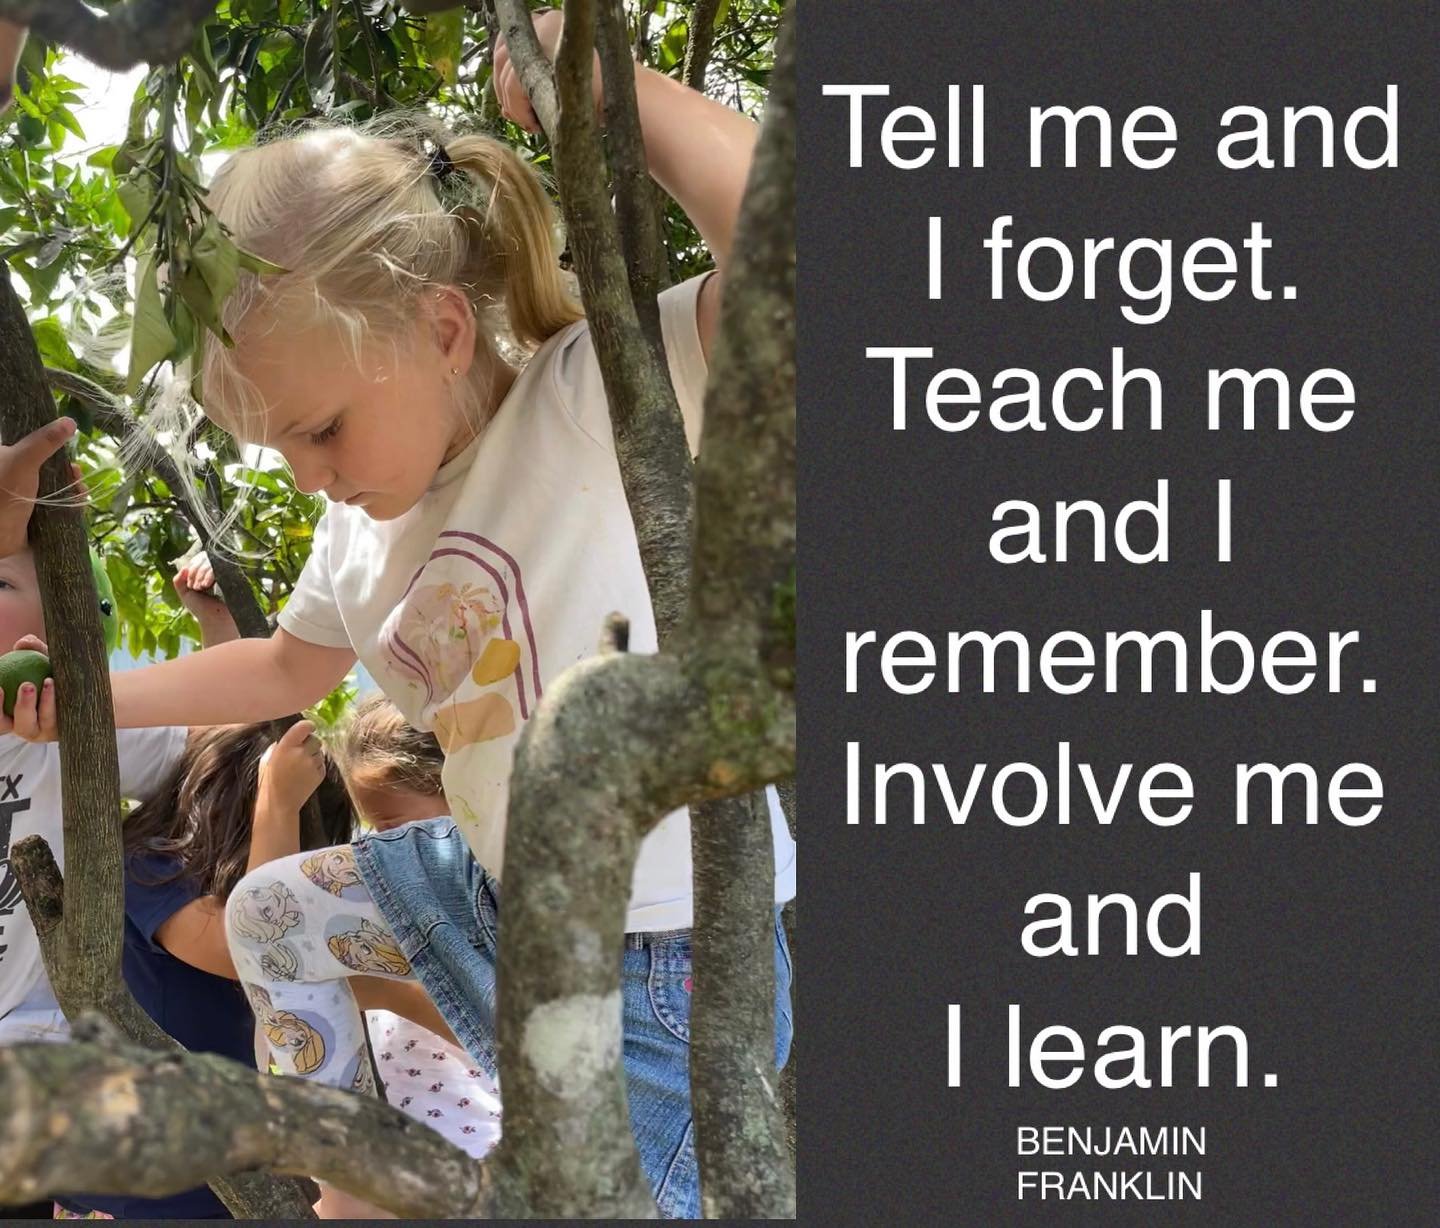 Children&rsquo;s active involvement changes what they know, can do, value and transforms their learning.🌿